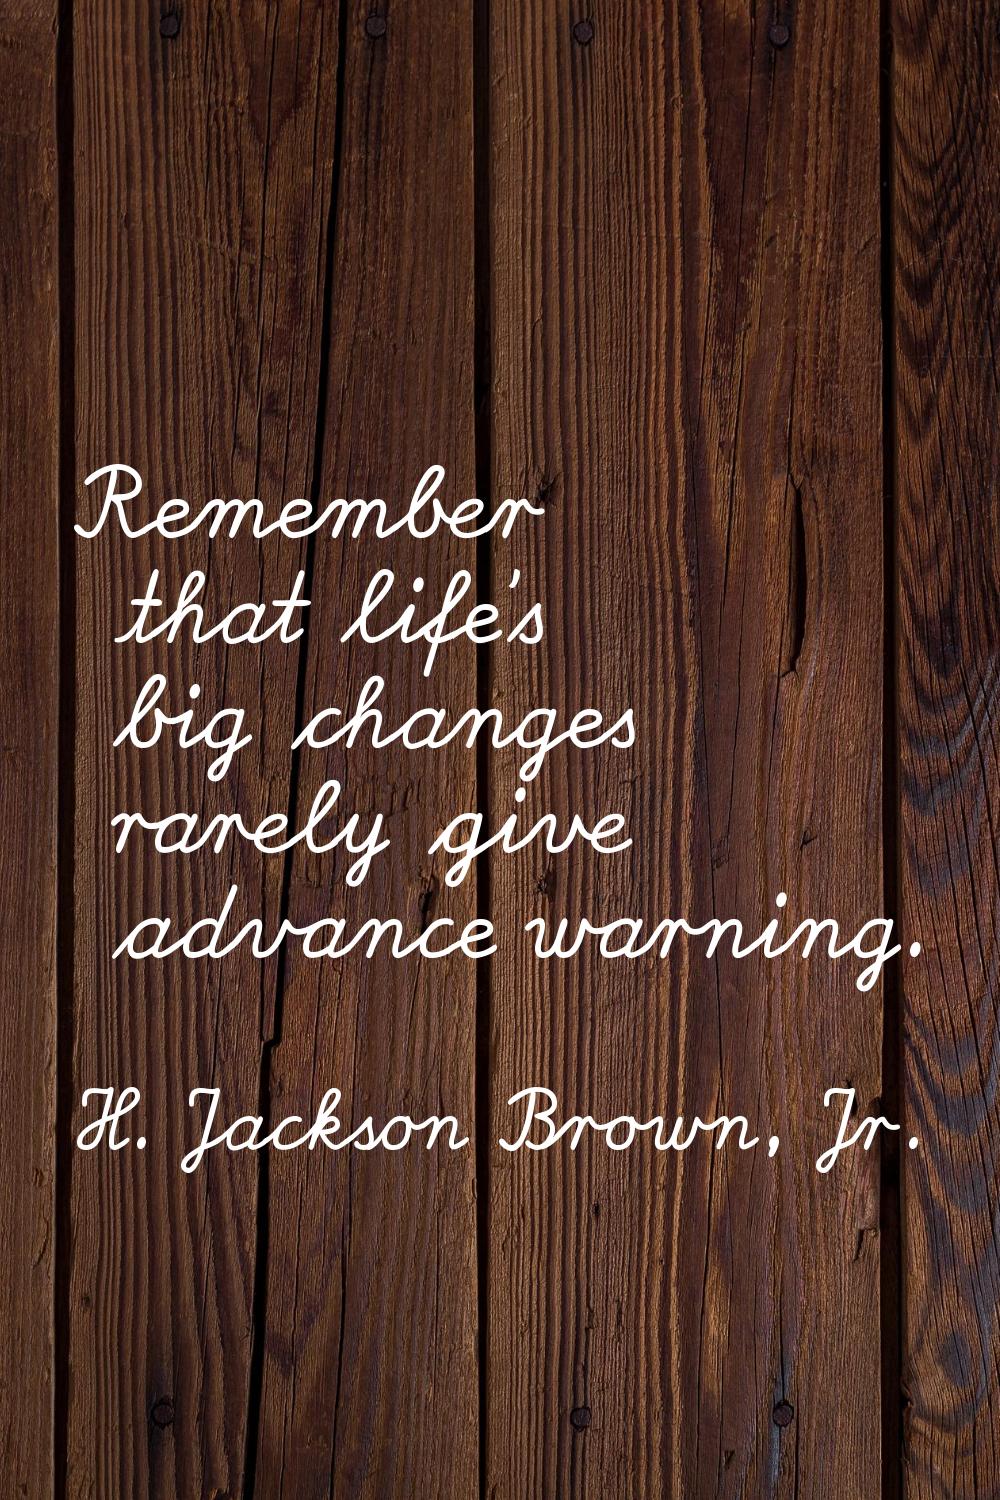 Remember that life's big changes rarely give advance warning.